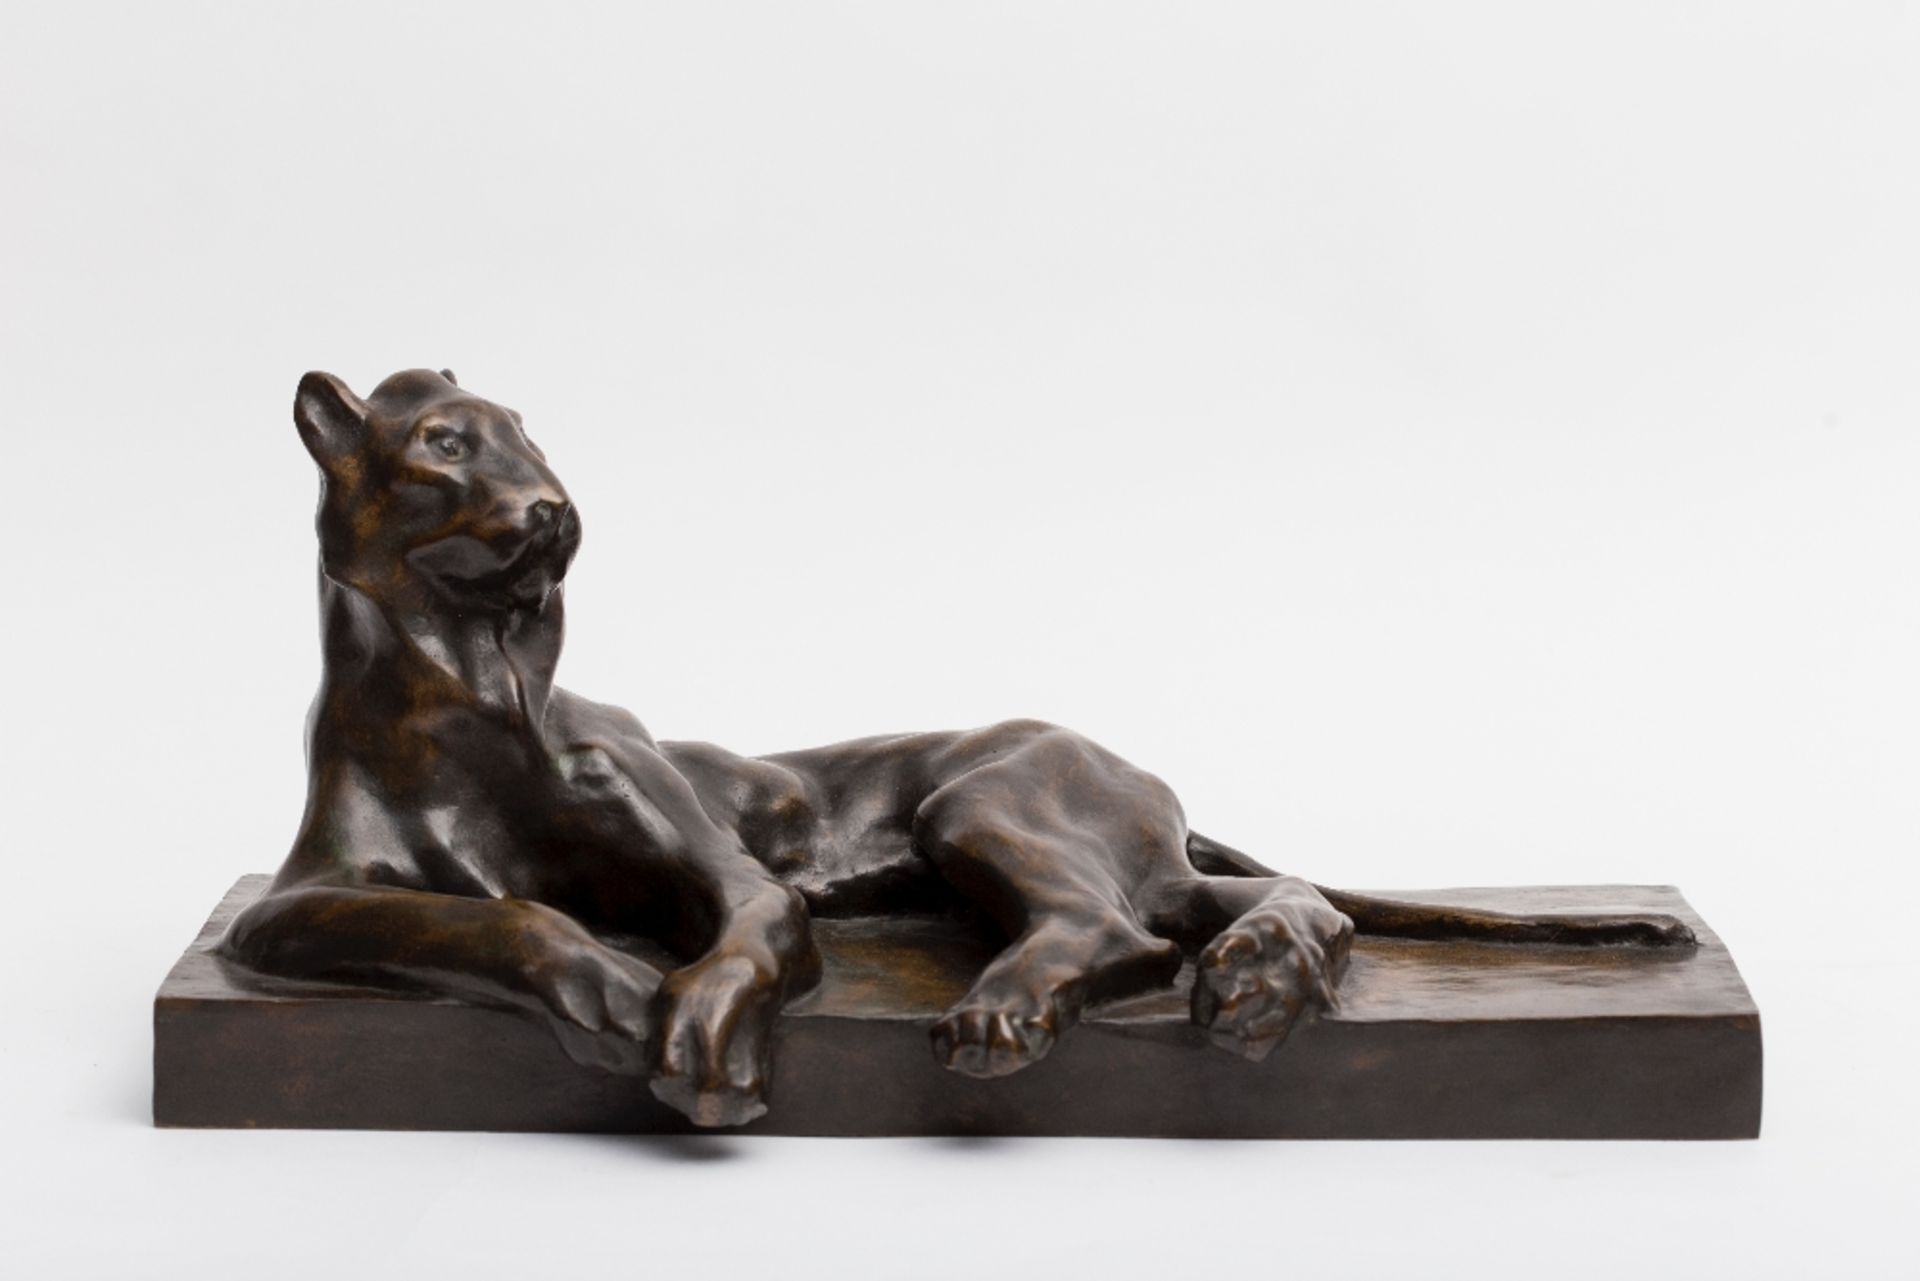 Jean Gaspar (1861-1931) and Verbeyst Founder Young tiger lying down; Bronze sculpture with golden-